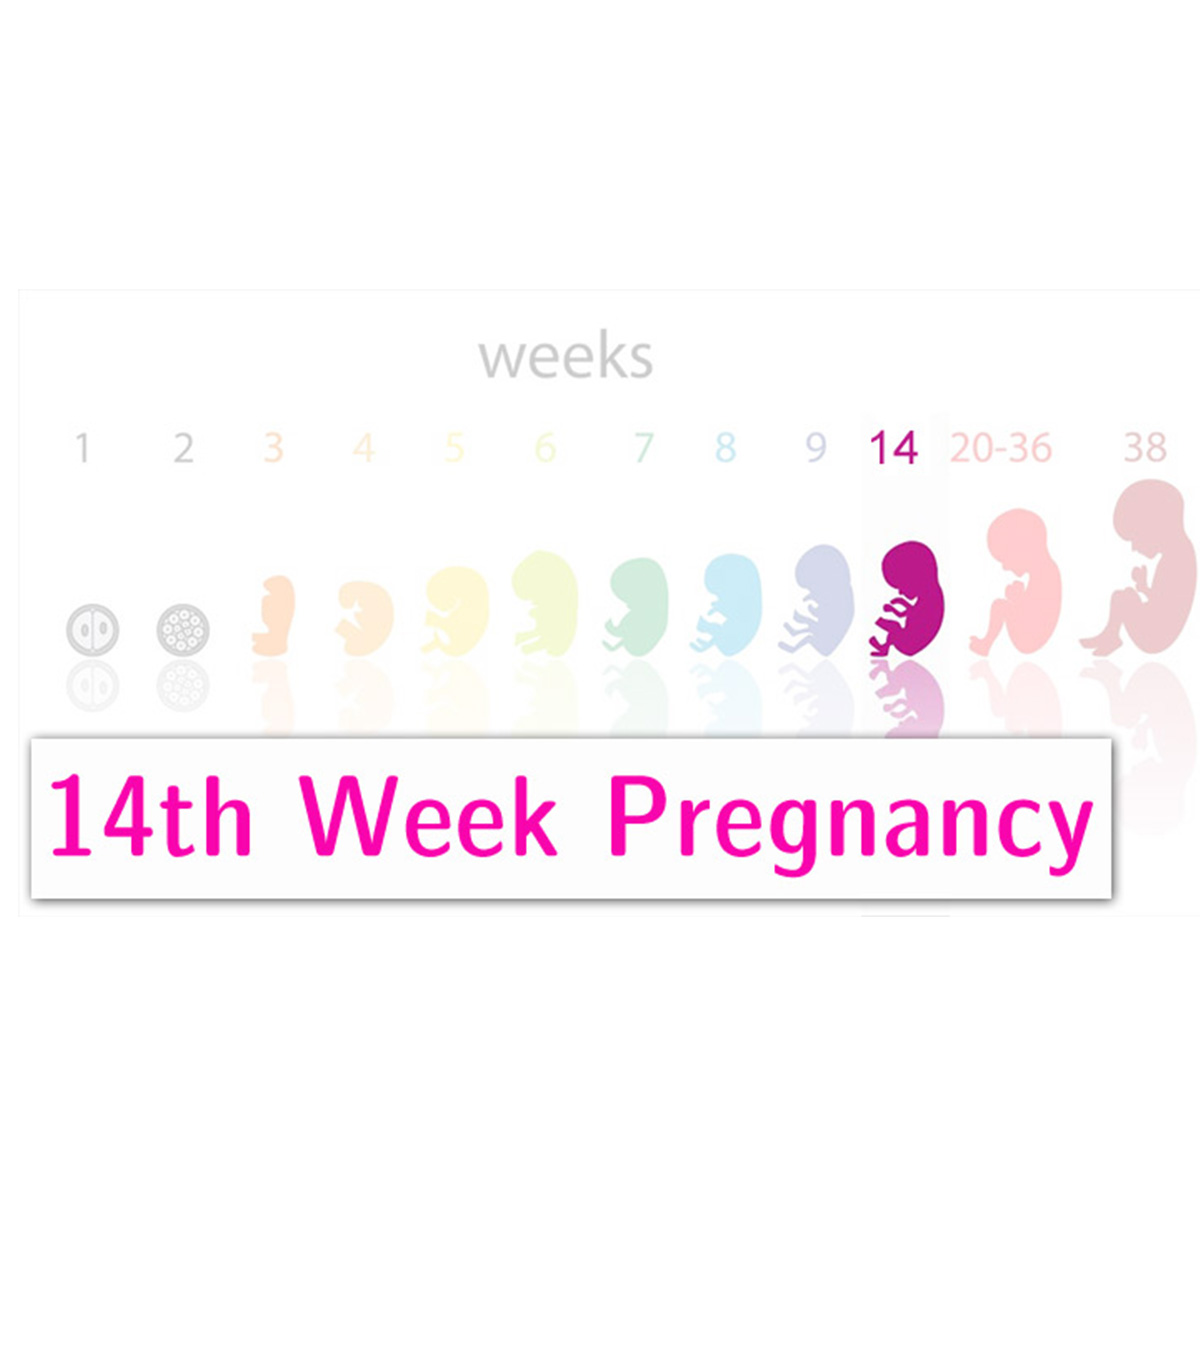 14th Week Pregnancy: Symptoms, Baby Development And Tips